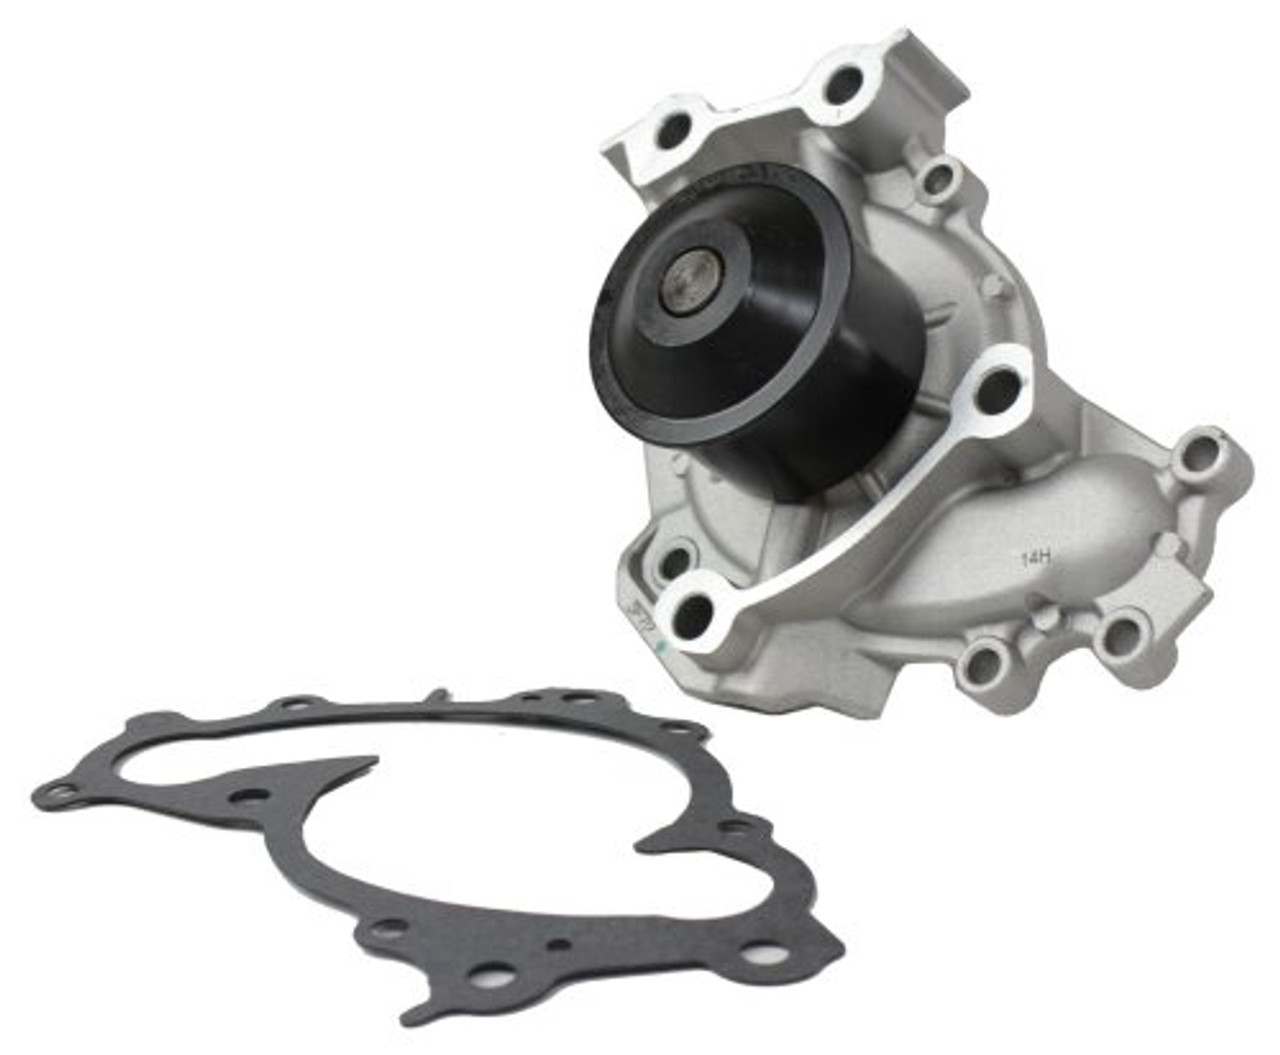 Water Pump - 2004 Toyota Camry 3.3L Engine Parts # WP960ZE50